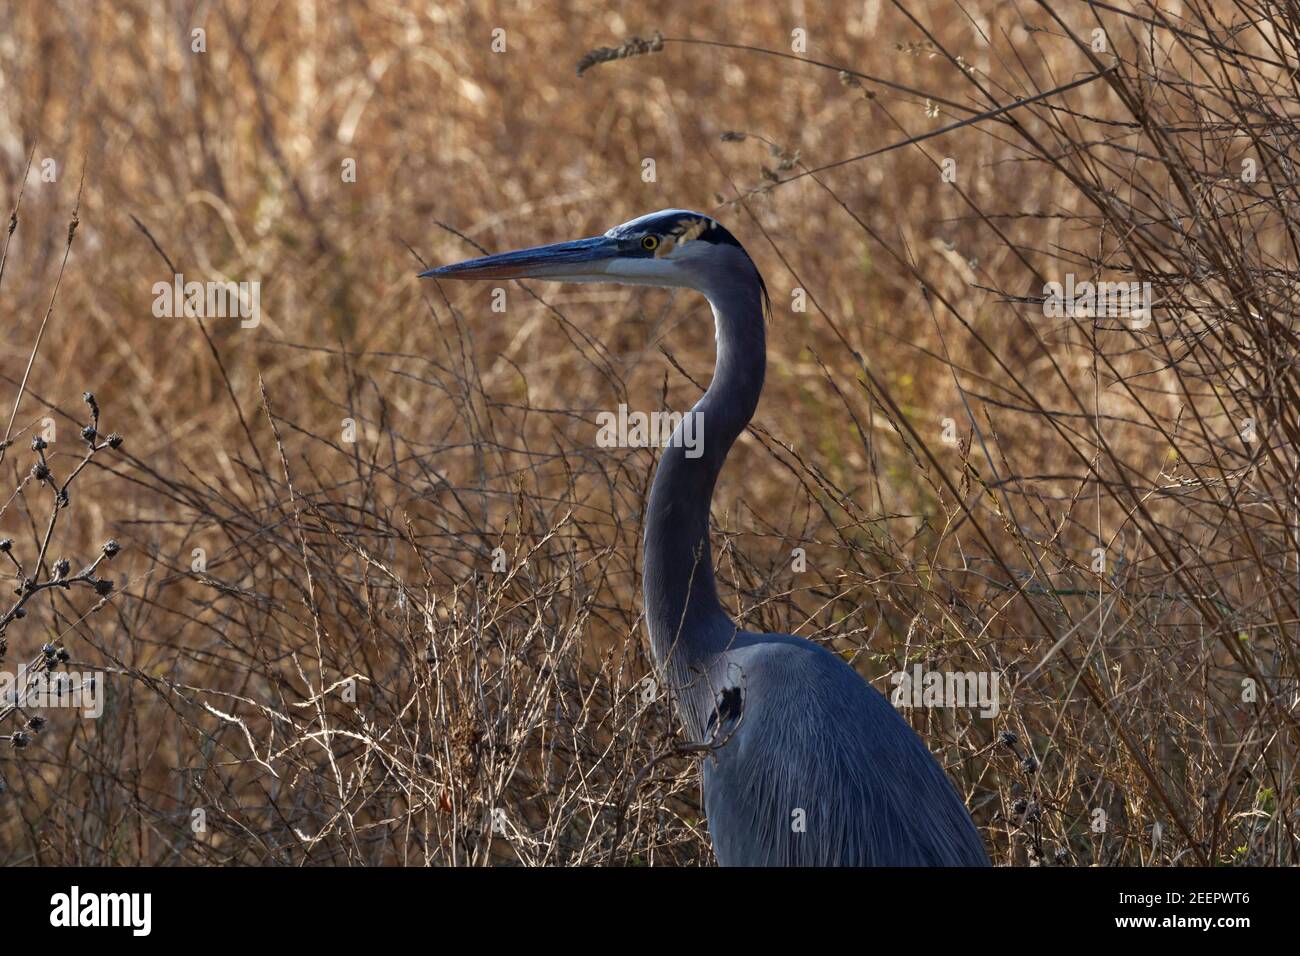 Golden beauty of dried grasses veil the gray, blue, and black hues of Great Blue Heron at Coluso National Wildlife Refuge in California Stock Photo